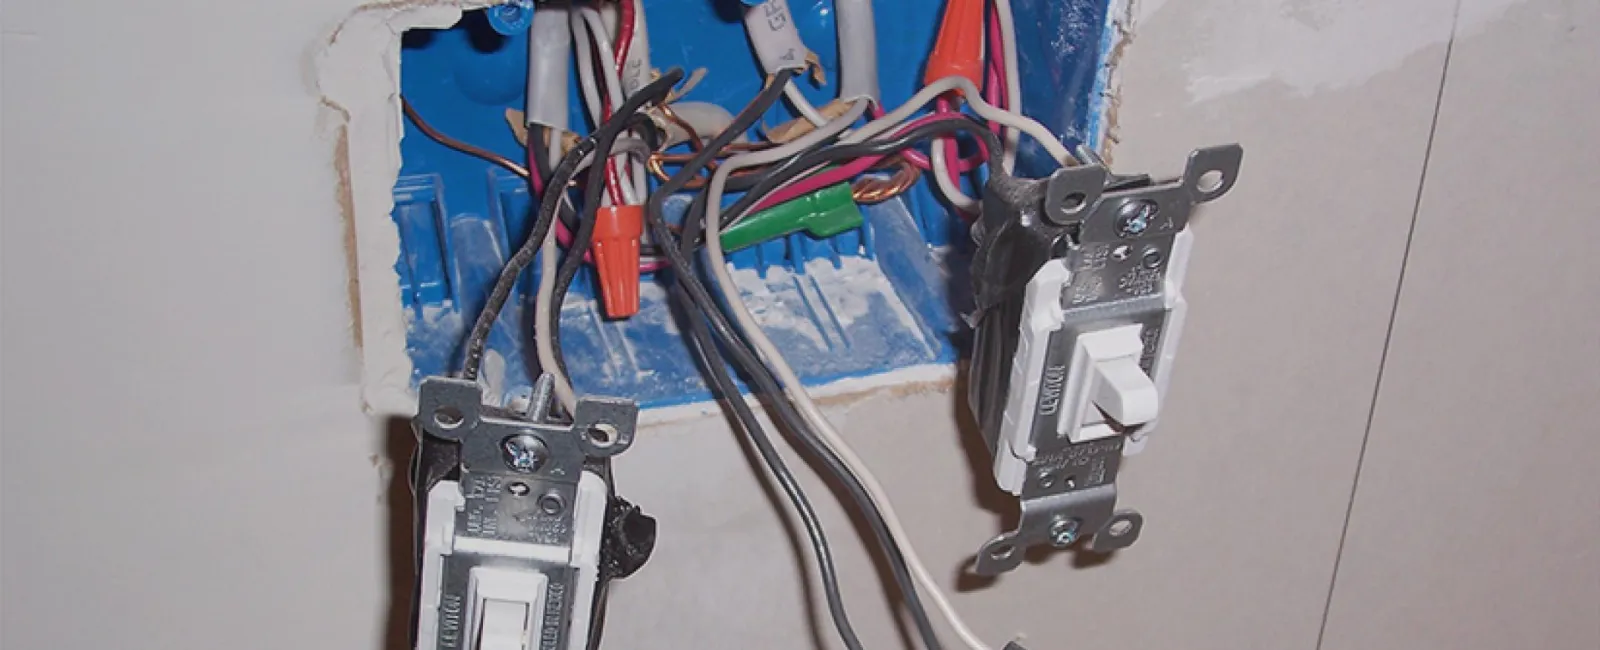 Avoid the Most Common Electrical Code Violations